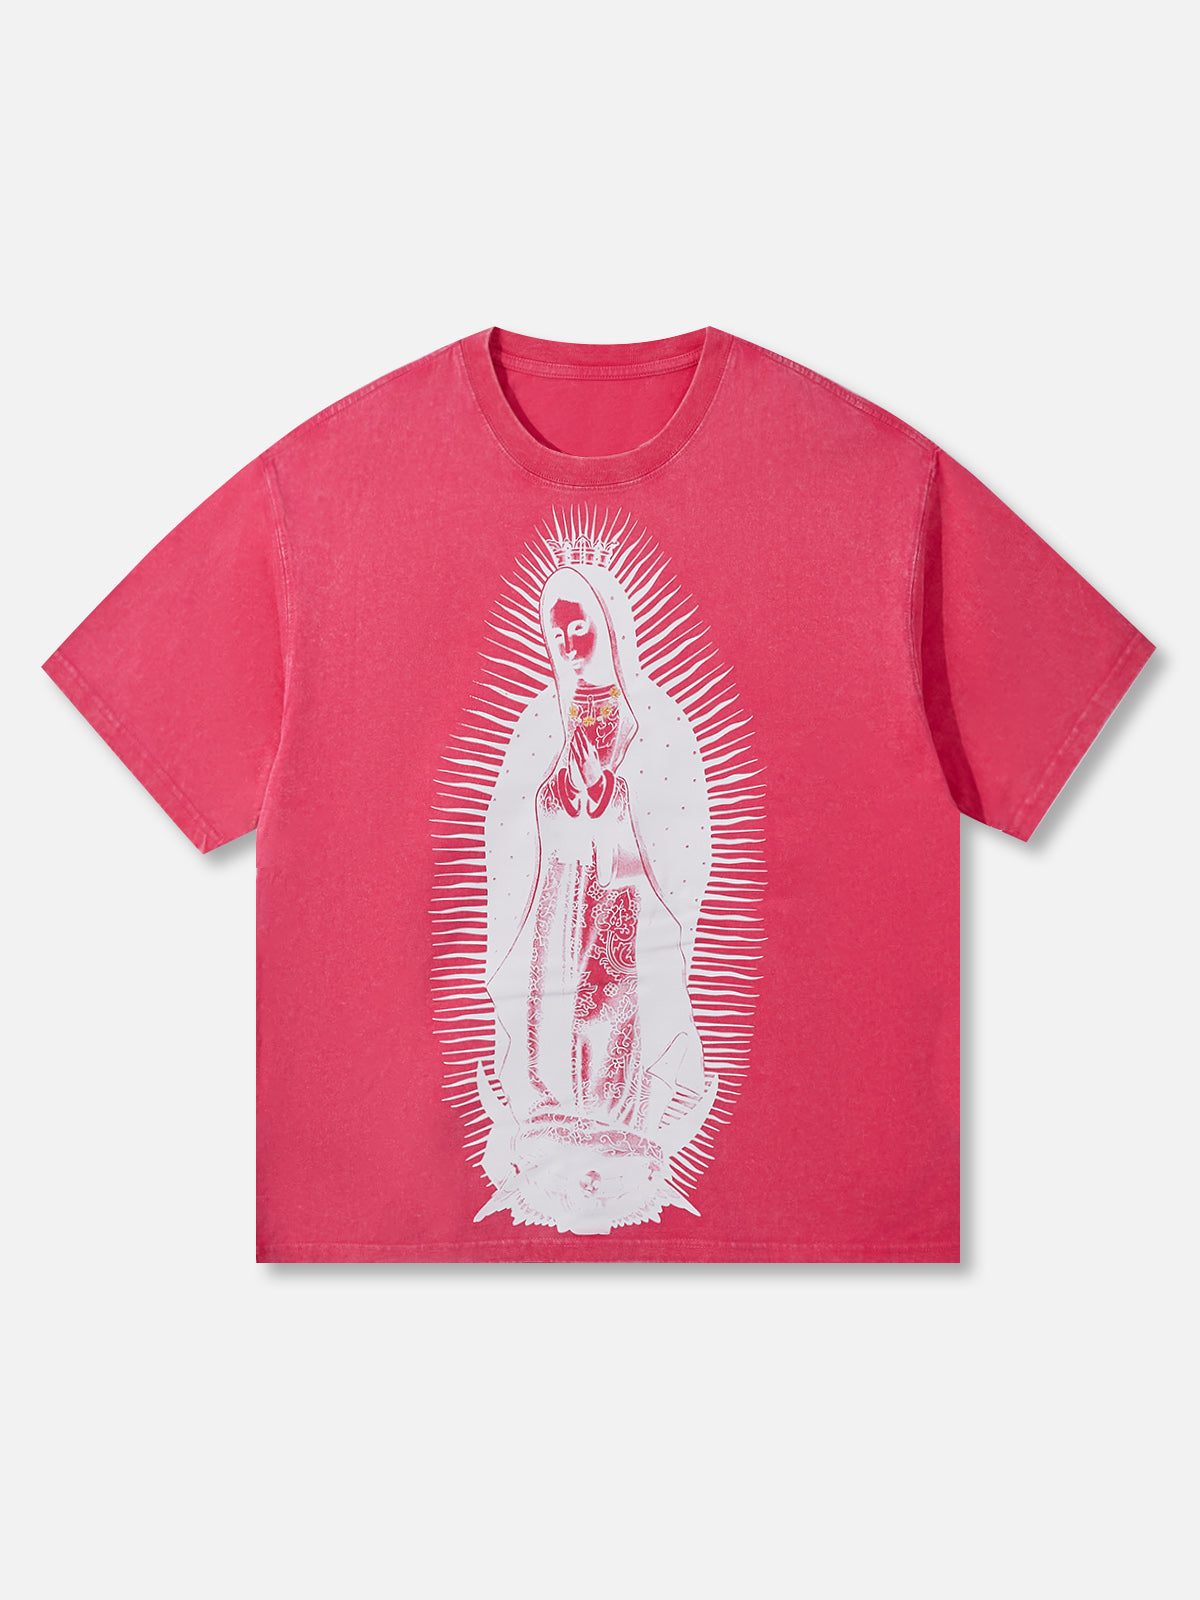 OBSTACLES & DANGERS©350g Five-Color Guadalupe Print T-shirt